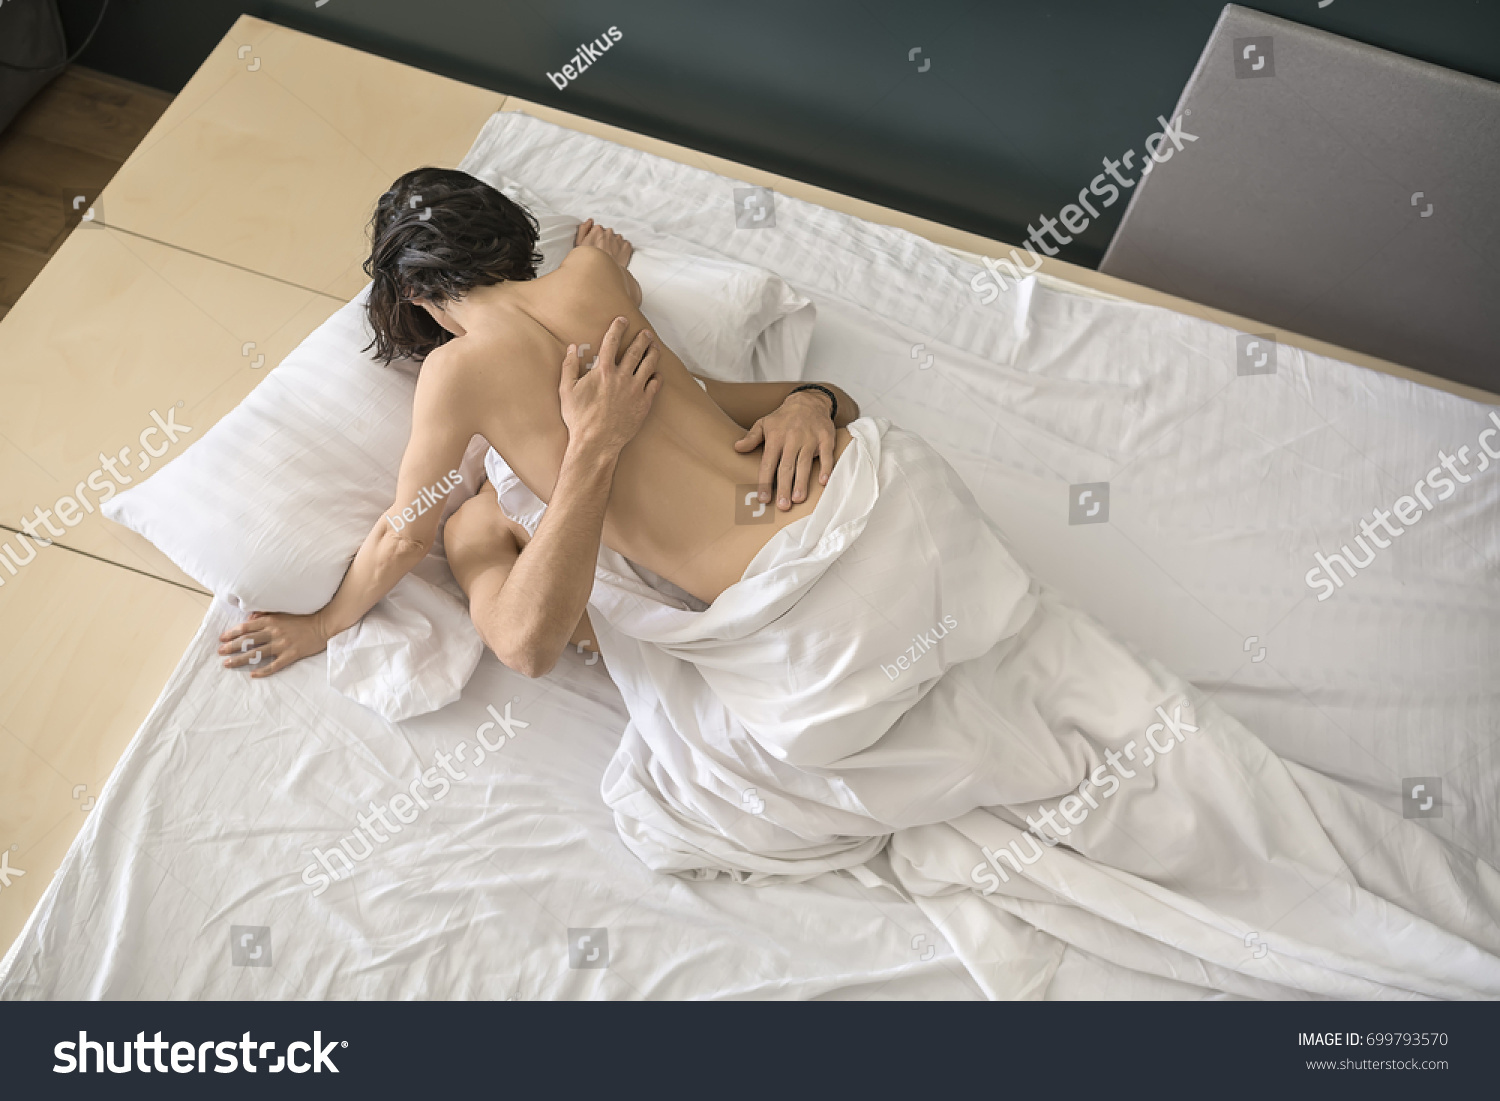 Hot Couple Sex On Bed